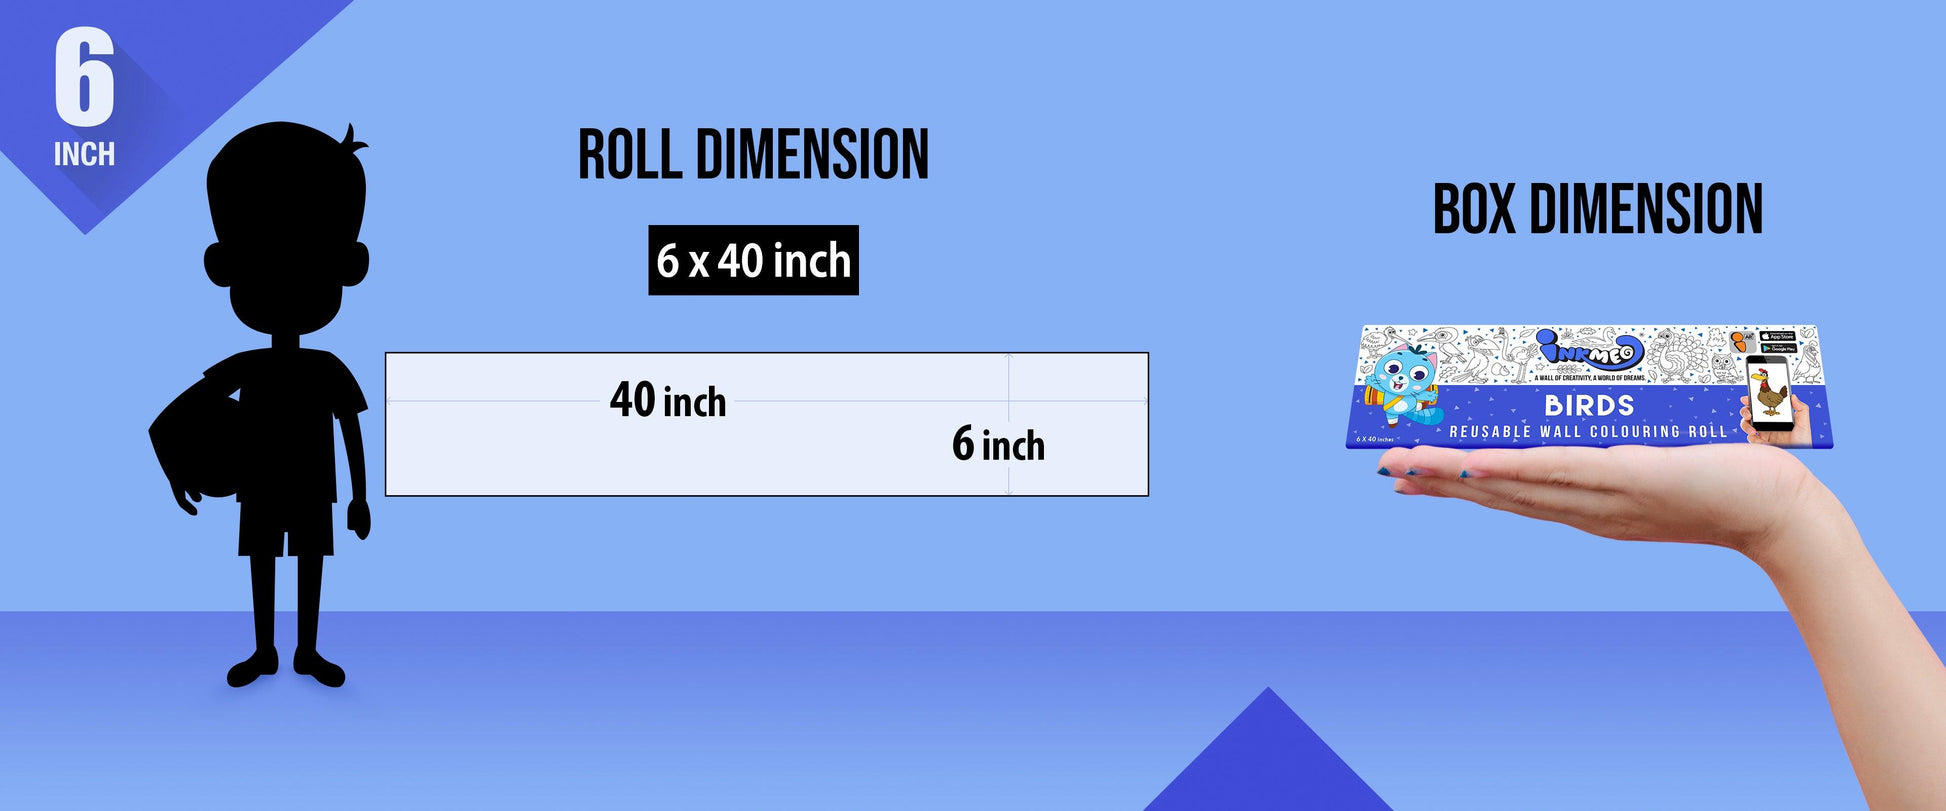 The image depicts a blue background with a ruler showing a child's height next to a 6*40 inches paper roll attached to the wall, alongside a picture of a box dimension.